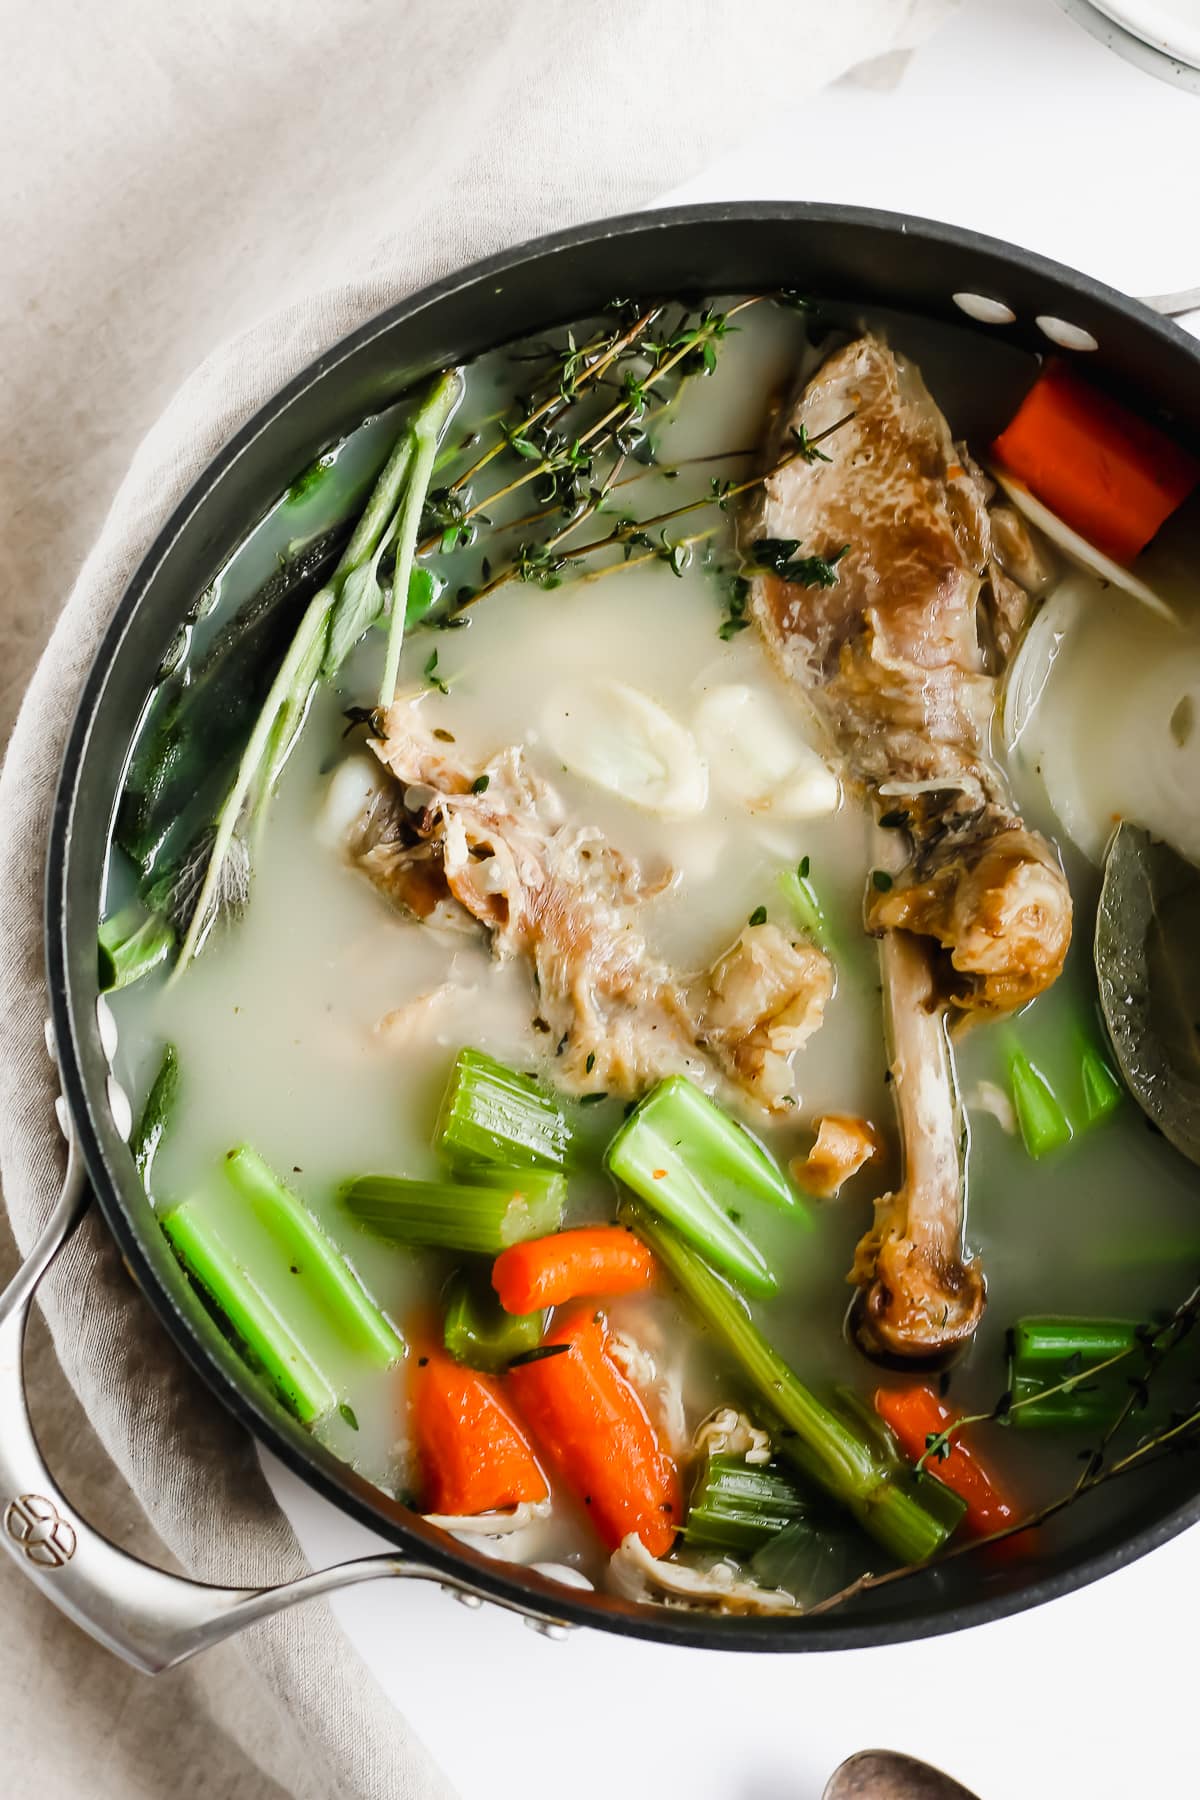 How to Make the Best Homemade Turkey Broth